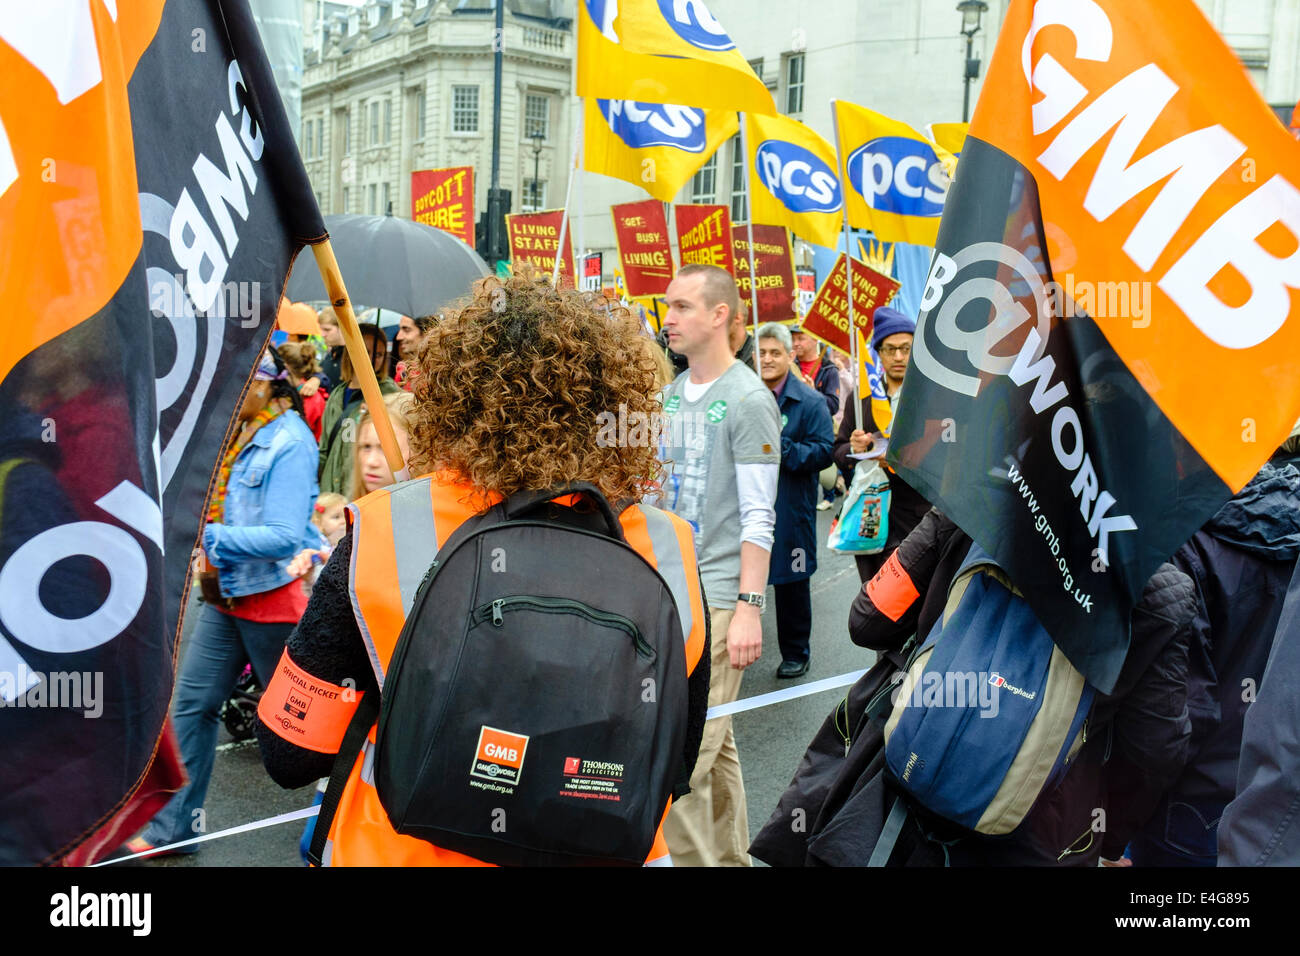 London, UK. 10th July, 2014.  Public sector workers' strike.  Members of the GMB union show support for their public sector colleagues during the march in central London. Credit:  mark phillips/Alamy Live News Stock Photo